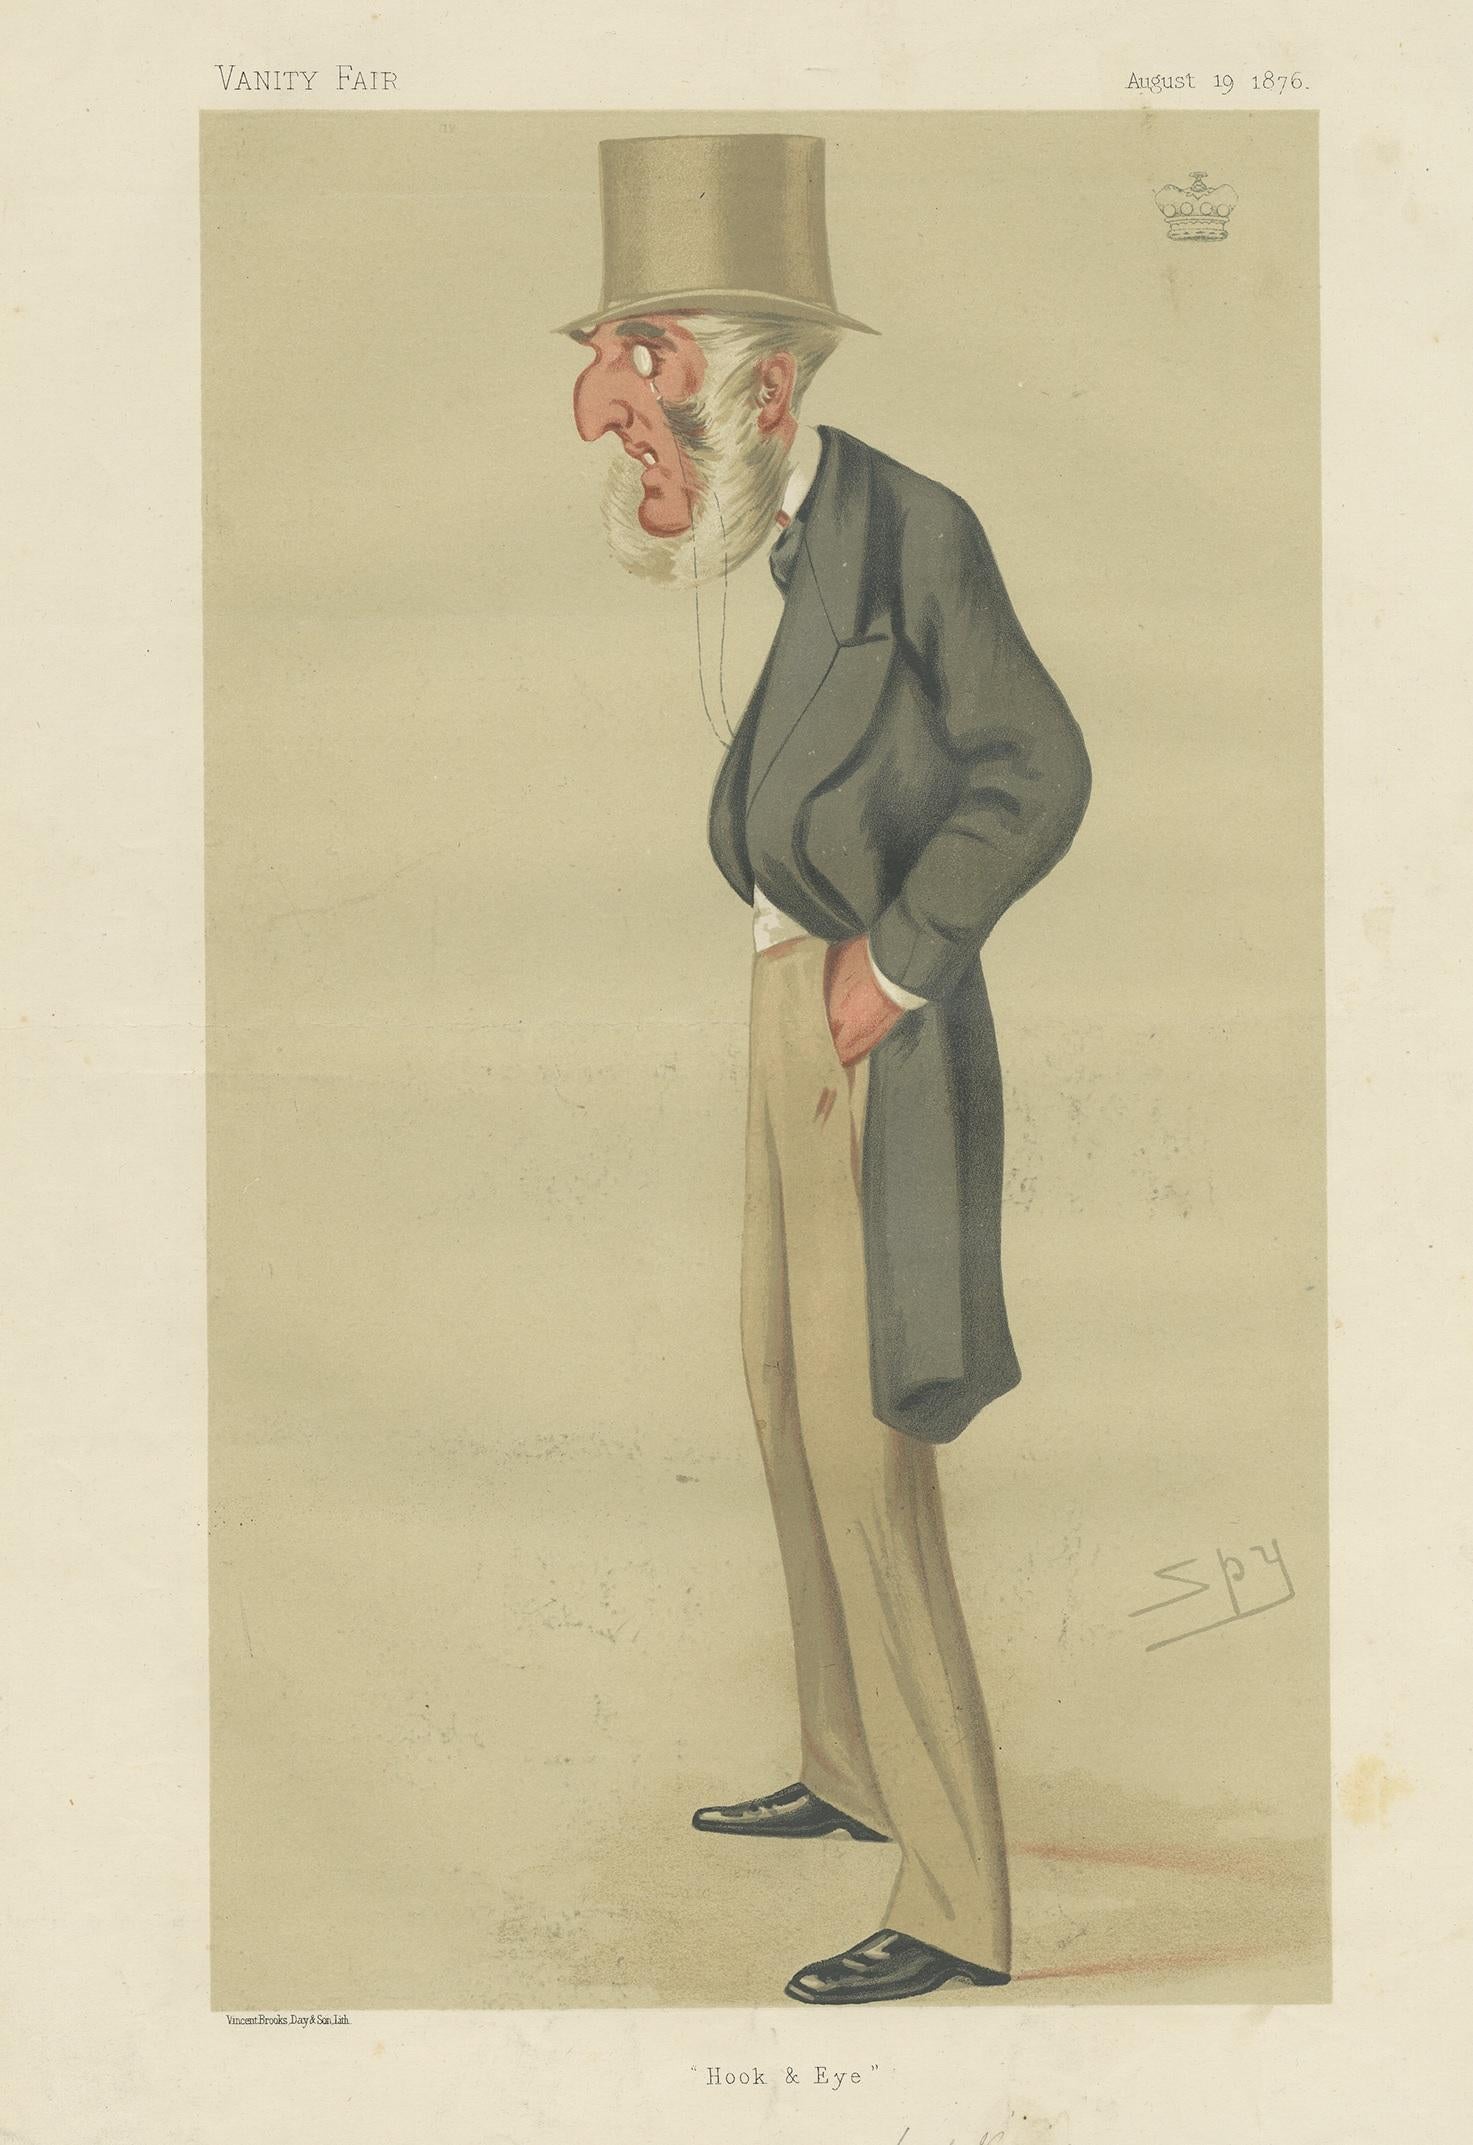 Antique print titled 'Hook & Eye'. Charles Crespigny Vivian, 2nd Baron Vivian (24 December 1808–24 April 1886), was a British peer and Whig politician from the Vivian family. This caricature print originates from the Vanity Fair of August 19, 1876.